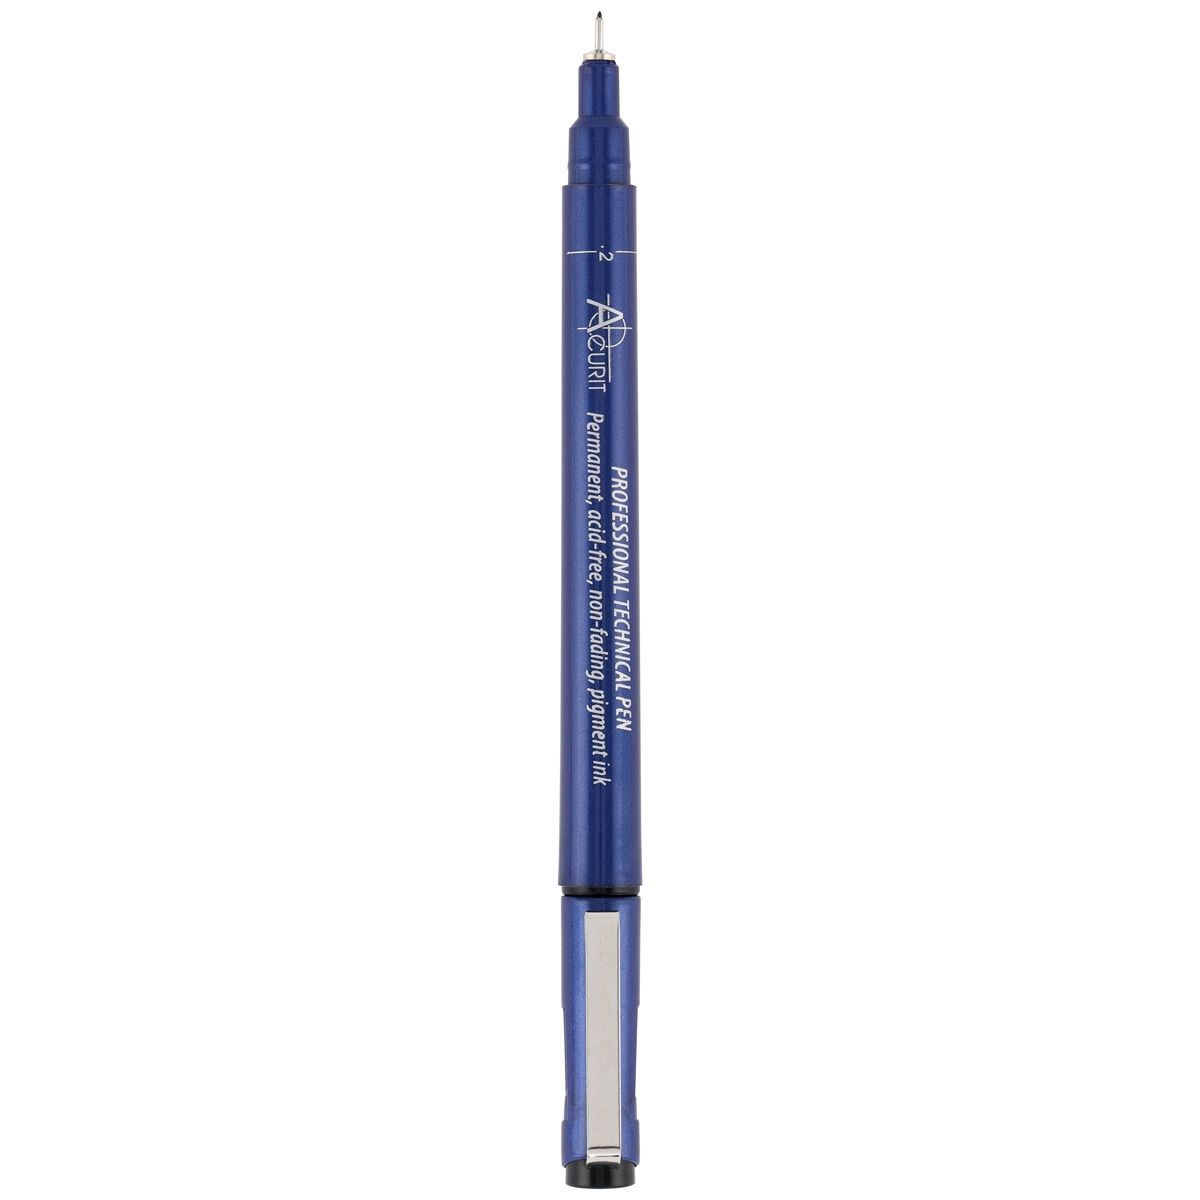 Acurit Technical Drawing Pen 0.20mm